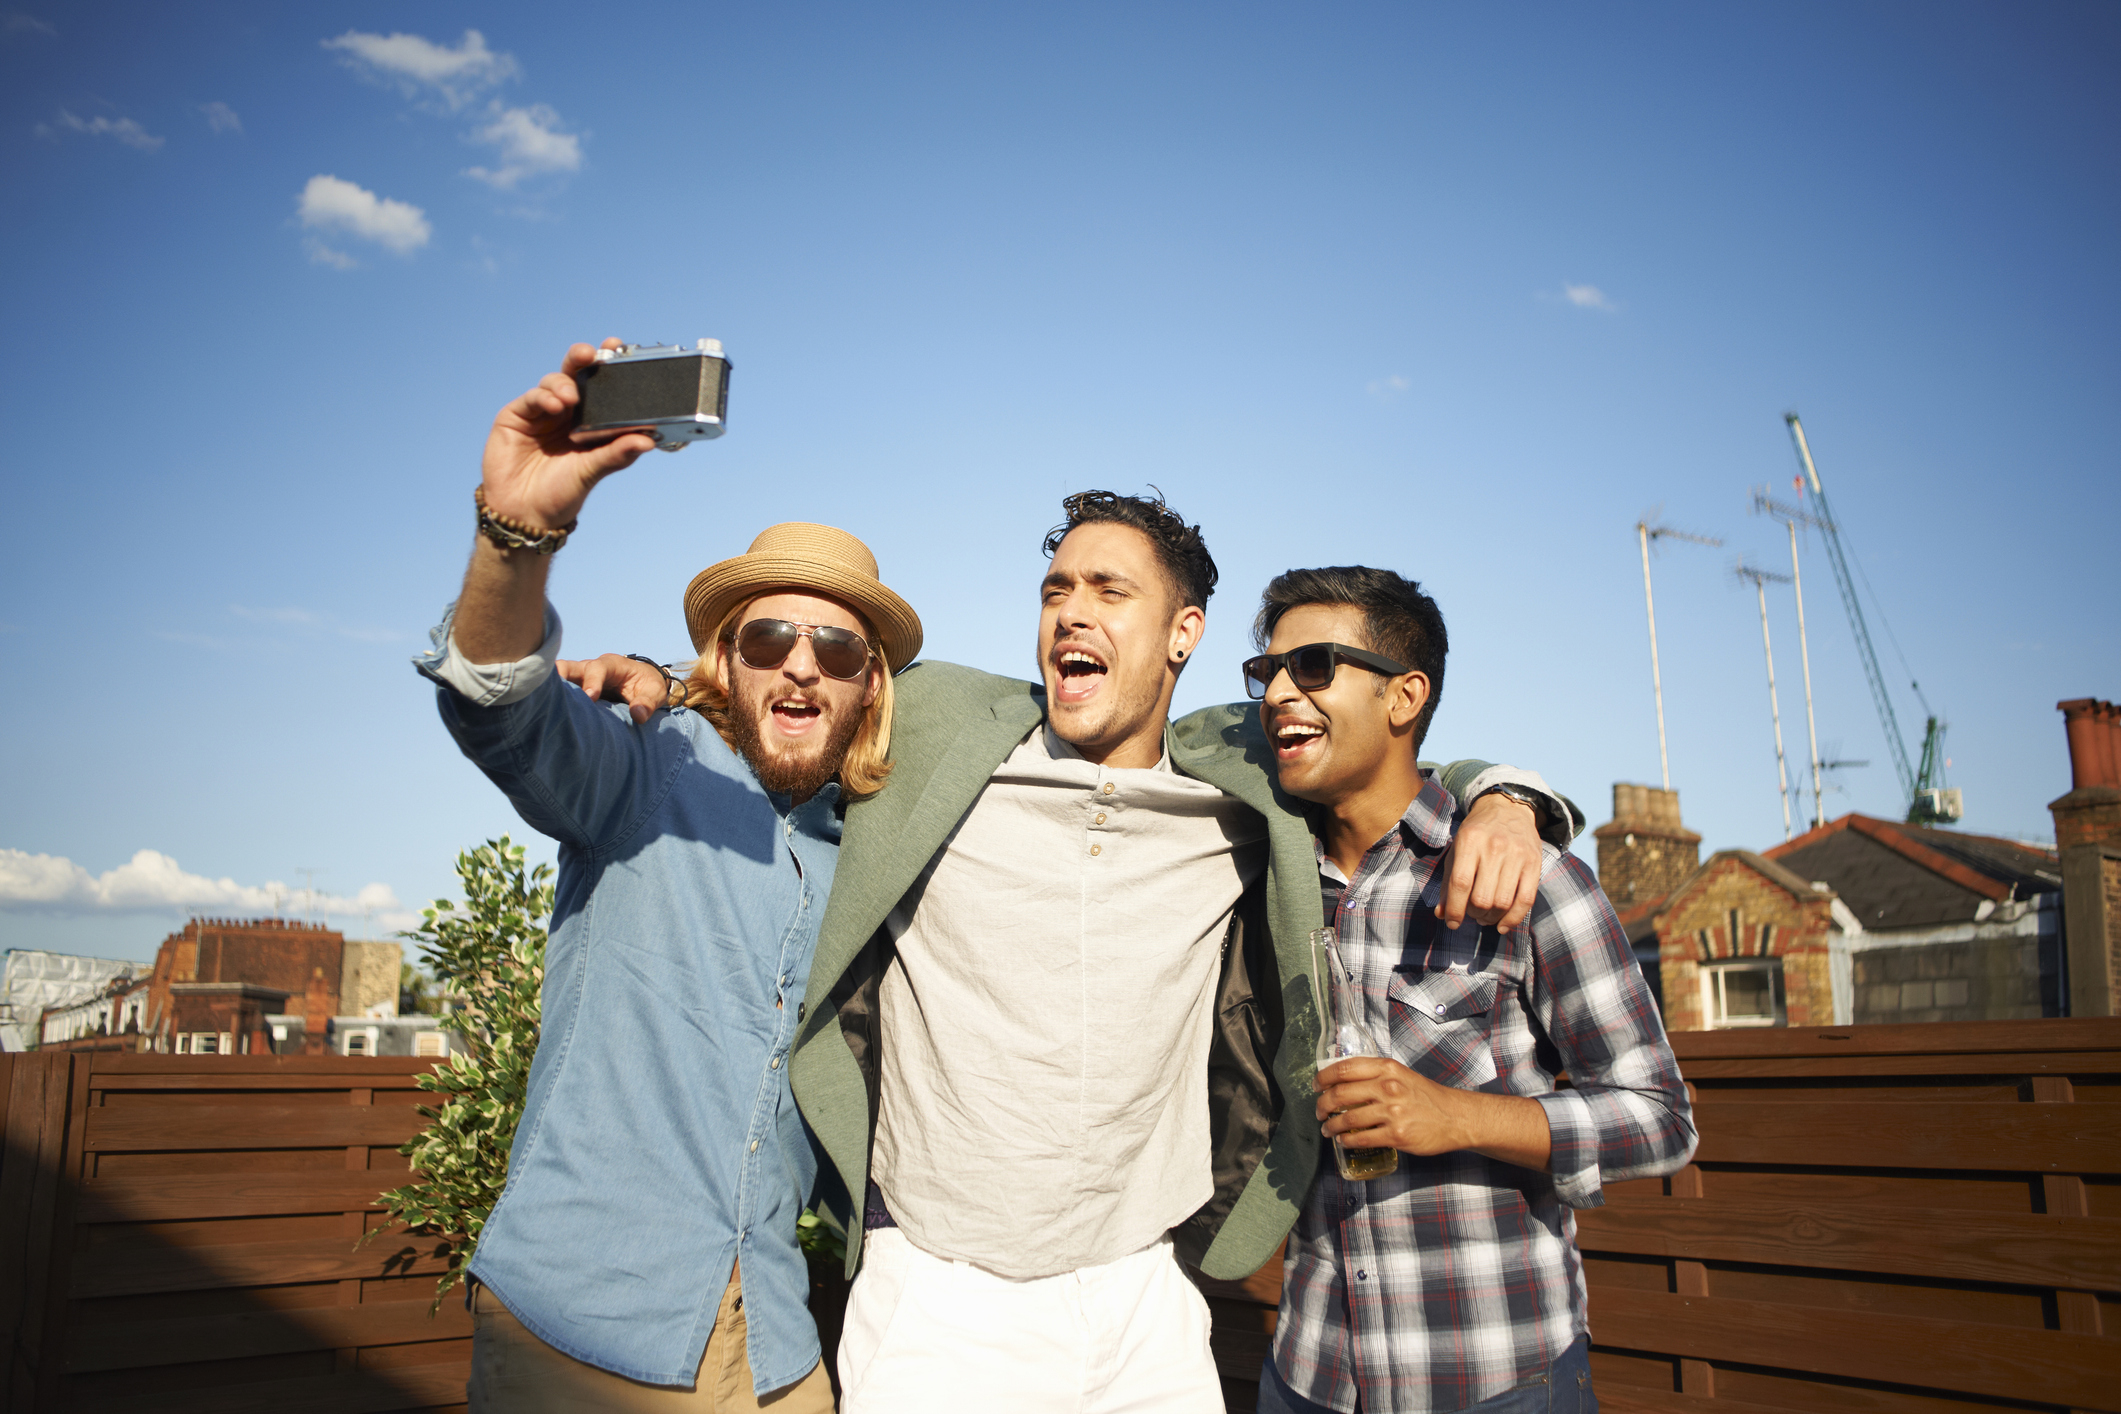 Three men take a joyful selfie outdoors on an urban patio with one holding a camera